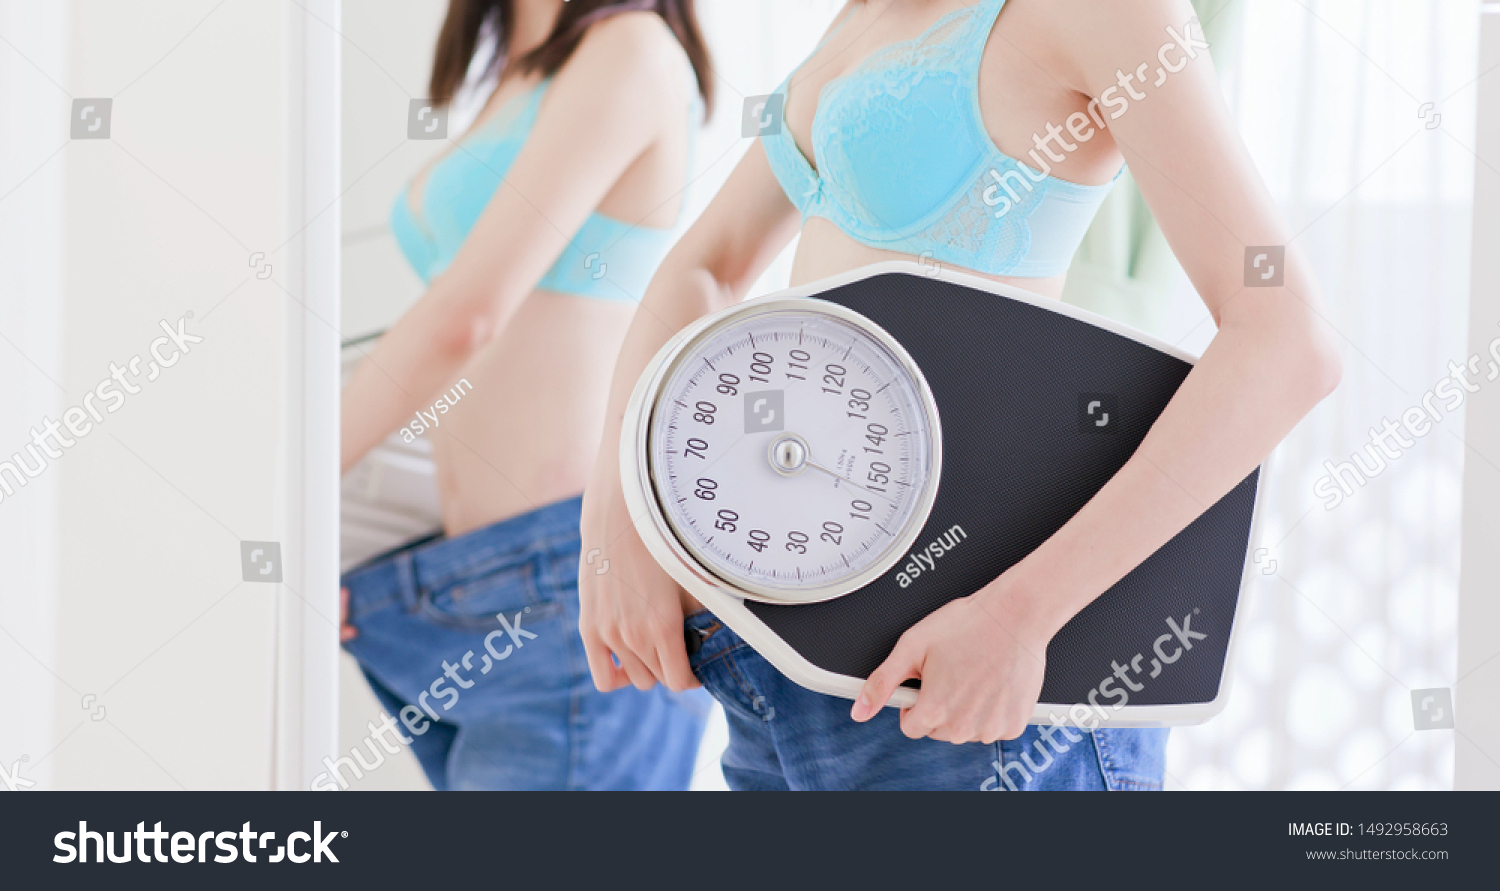 Girl lose weight successfully and show her big jean before in front of mirror with scale #1492958663